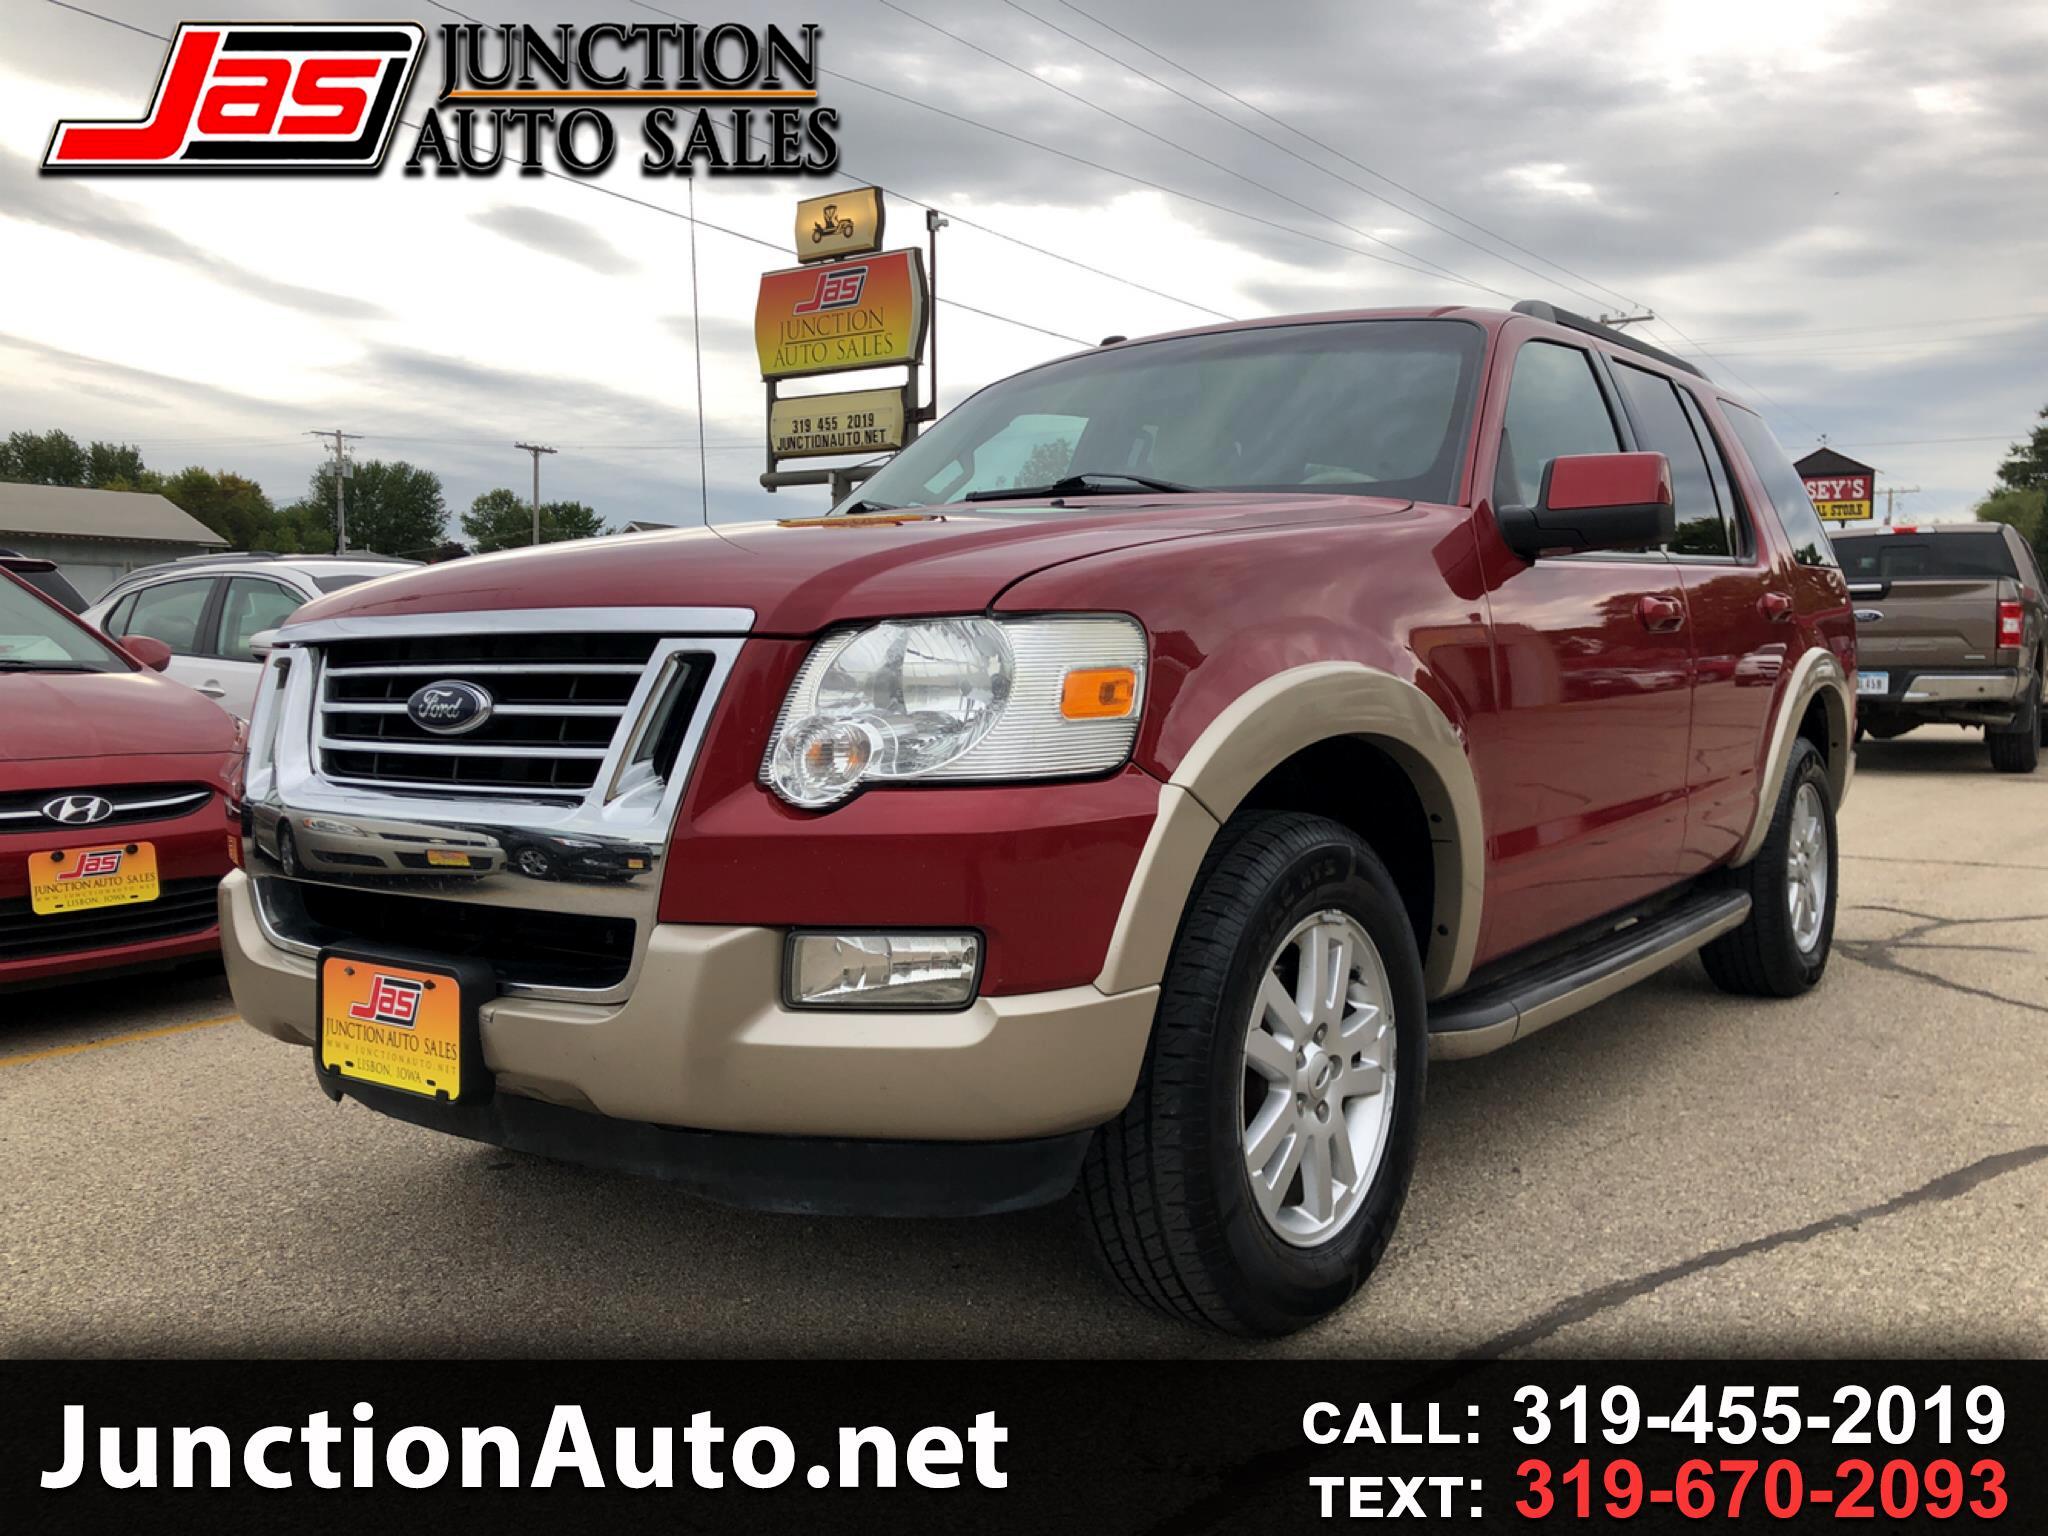 Used 2009 Ford Explorer Eddie Bauer 4 0l 4wd For Sale In